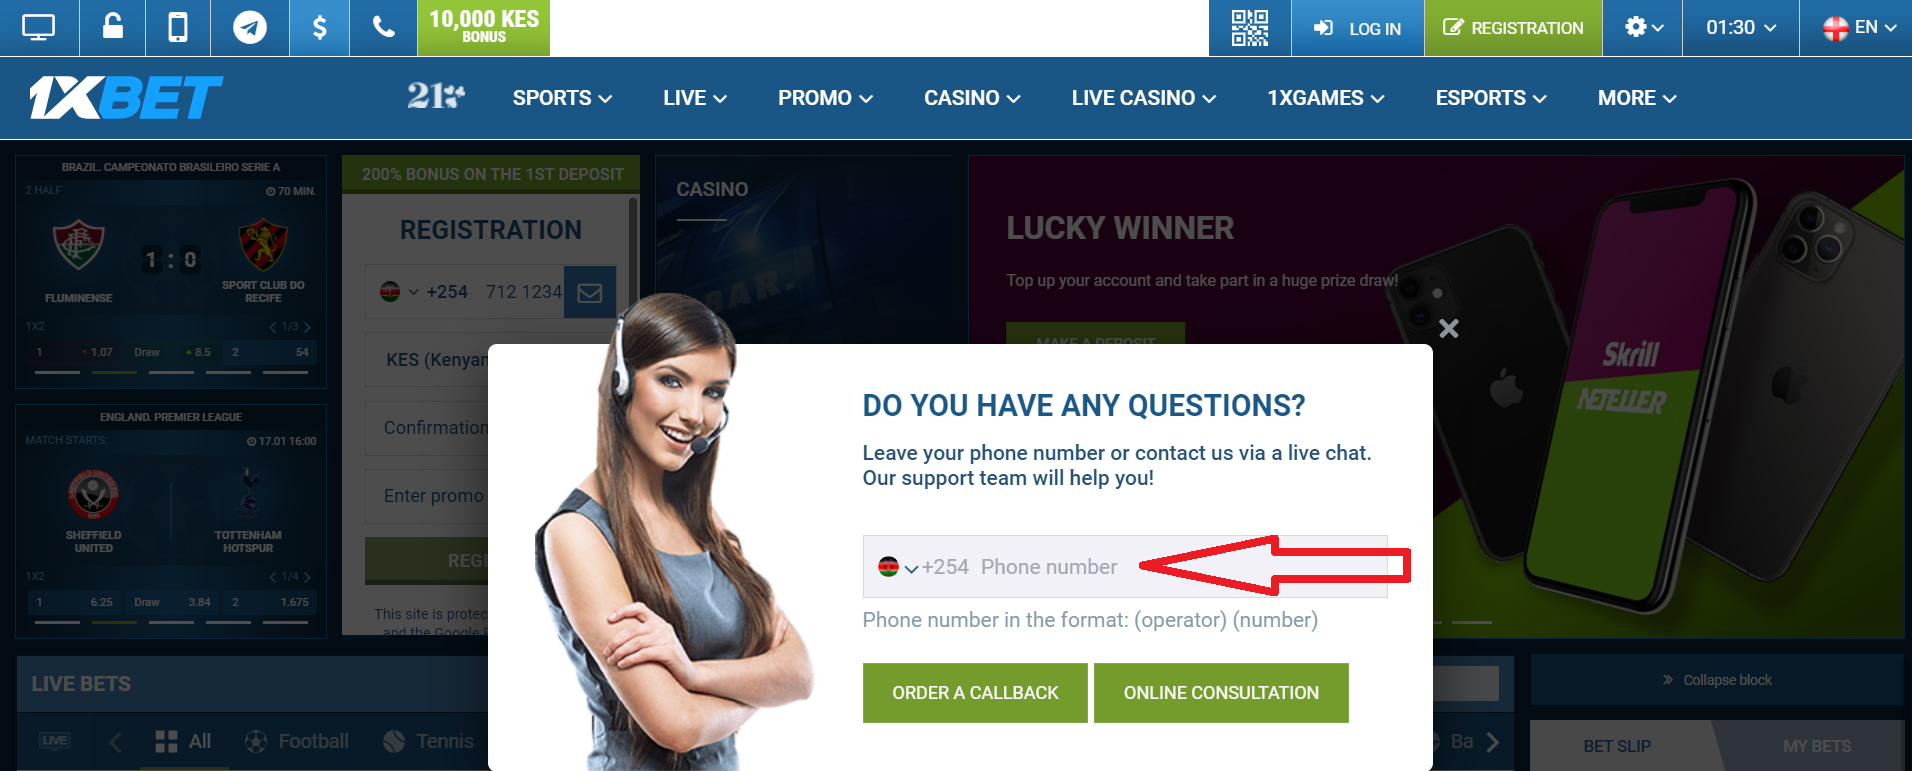 How to Login 1xBet Kenya if You Forgot Your Login or Password